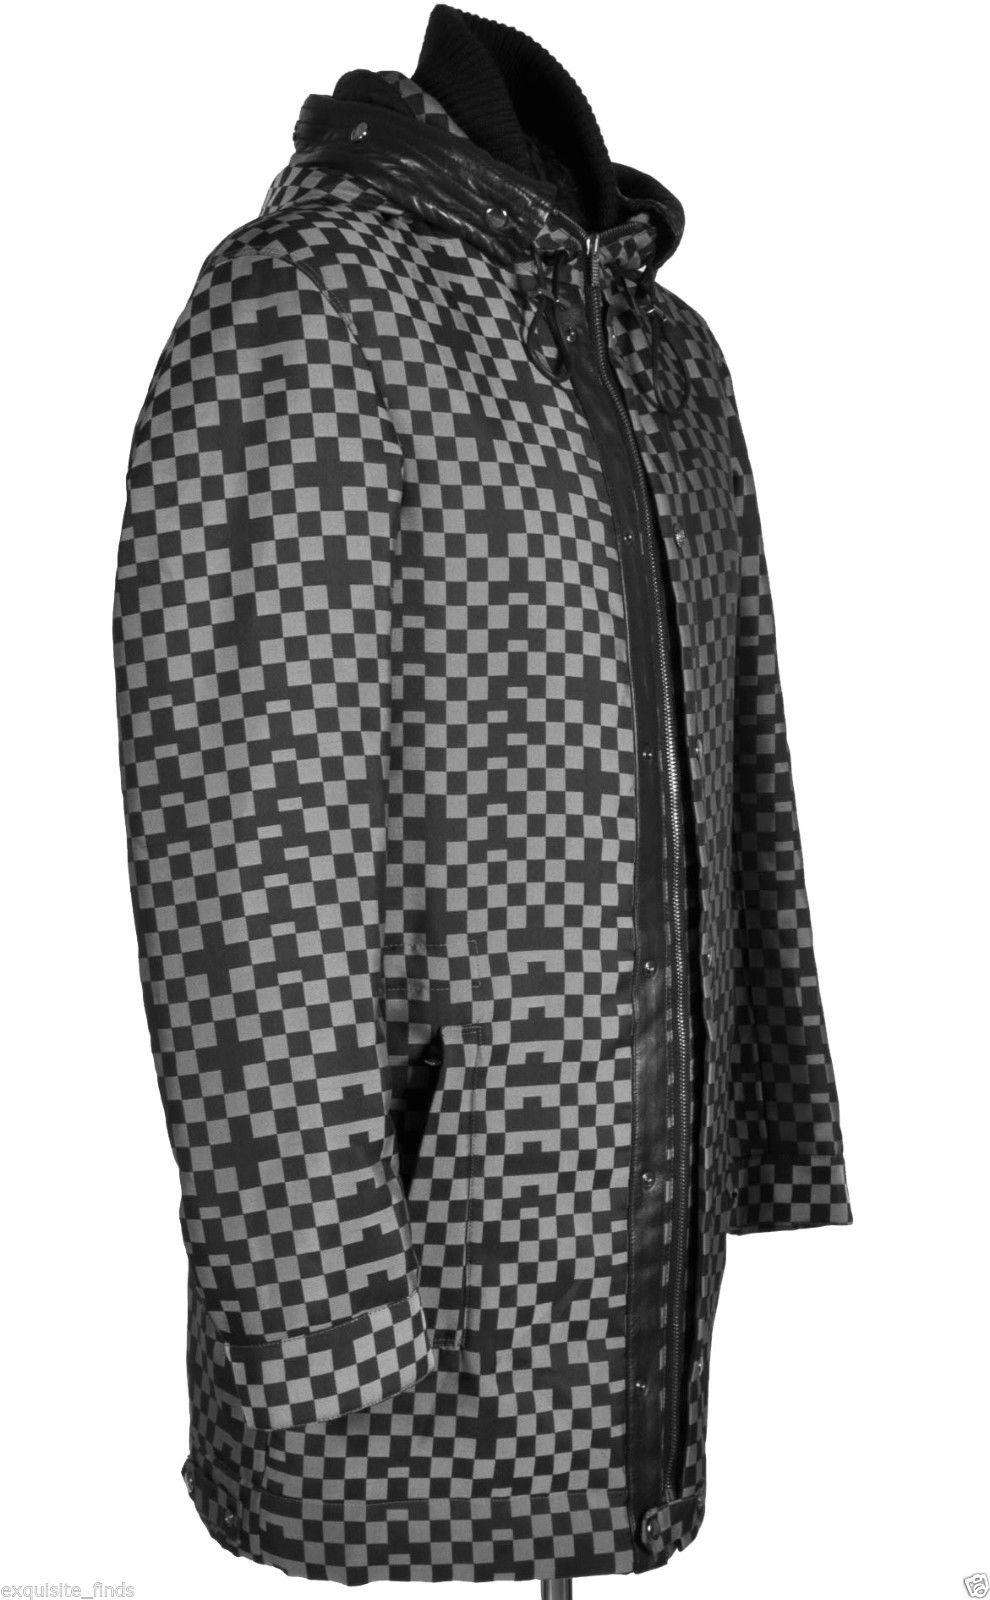 checkered jacket with hood